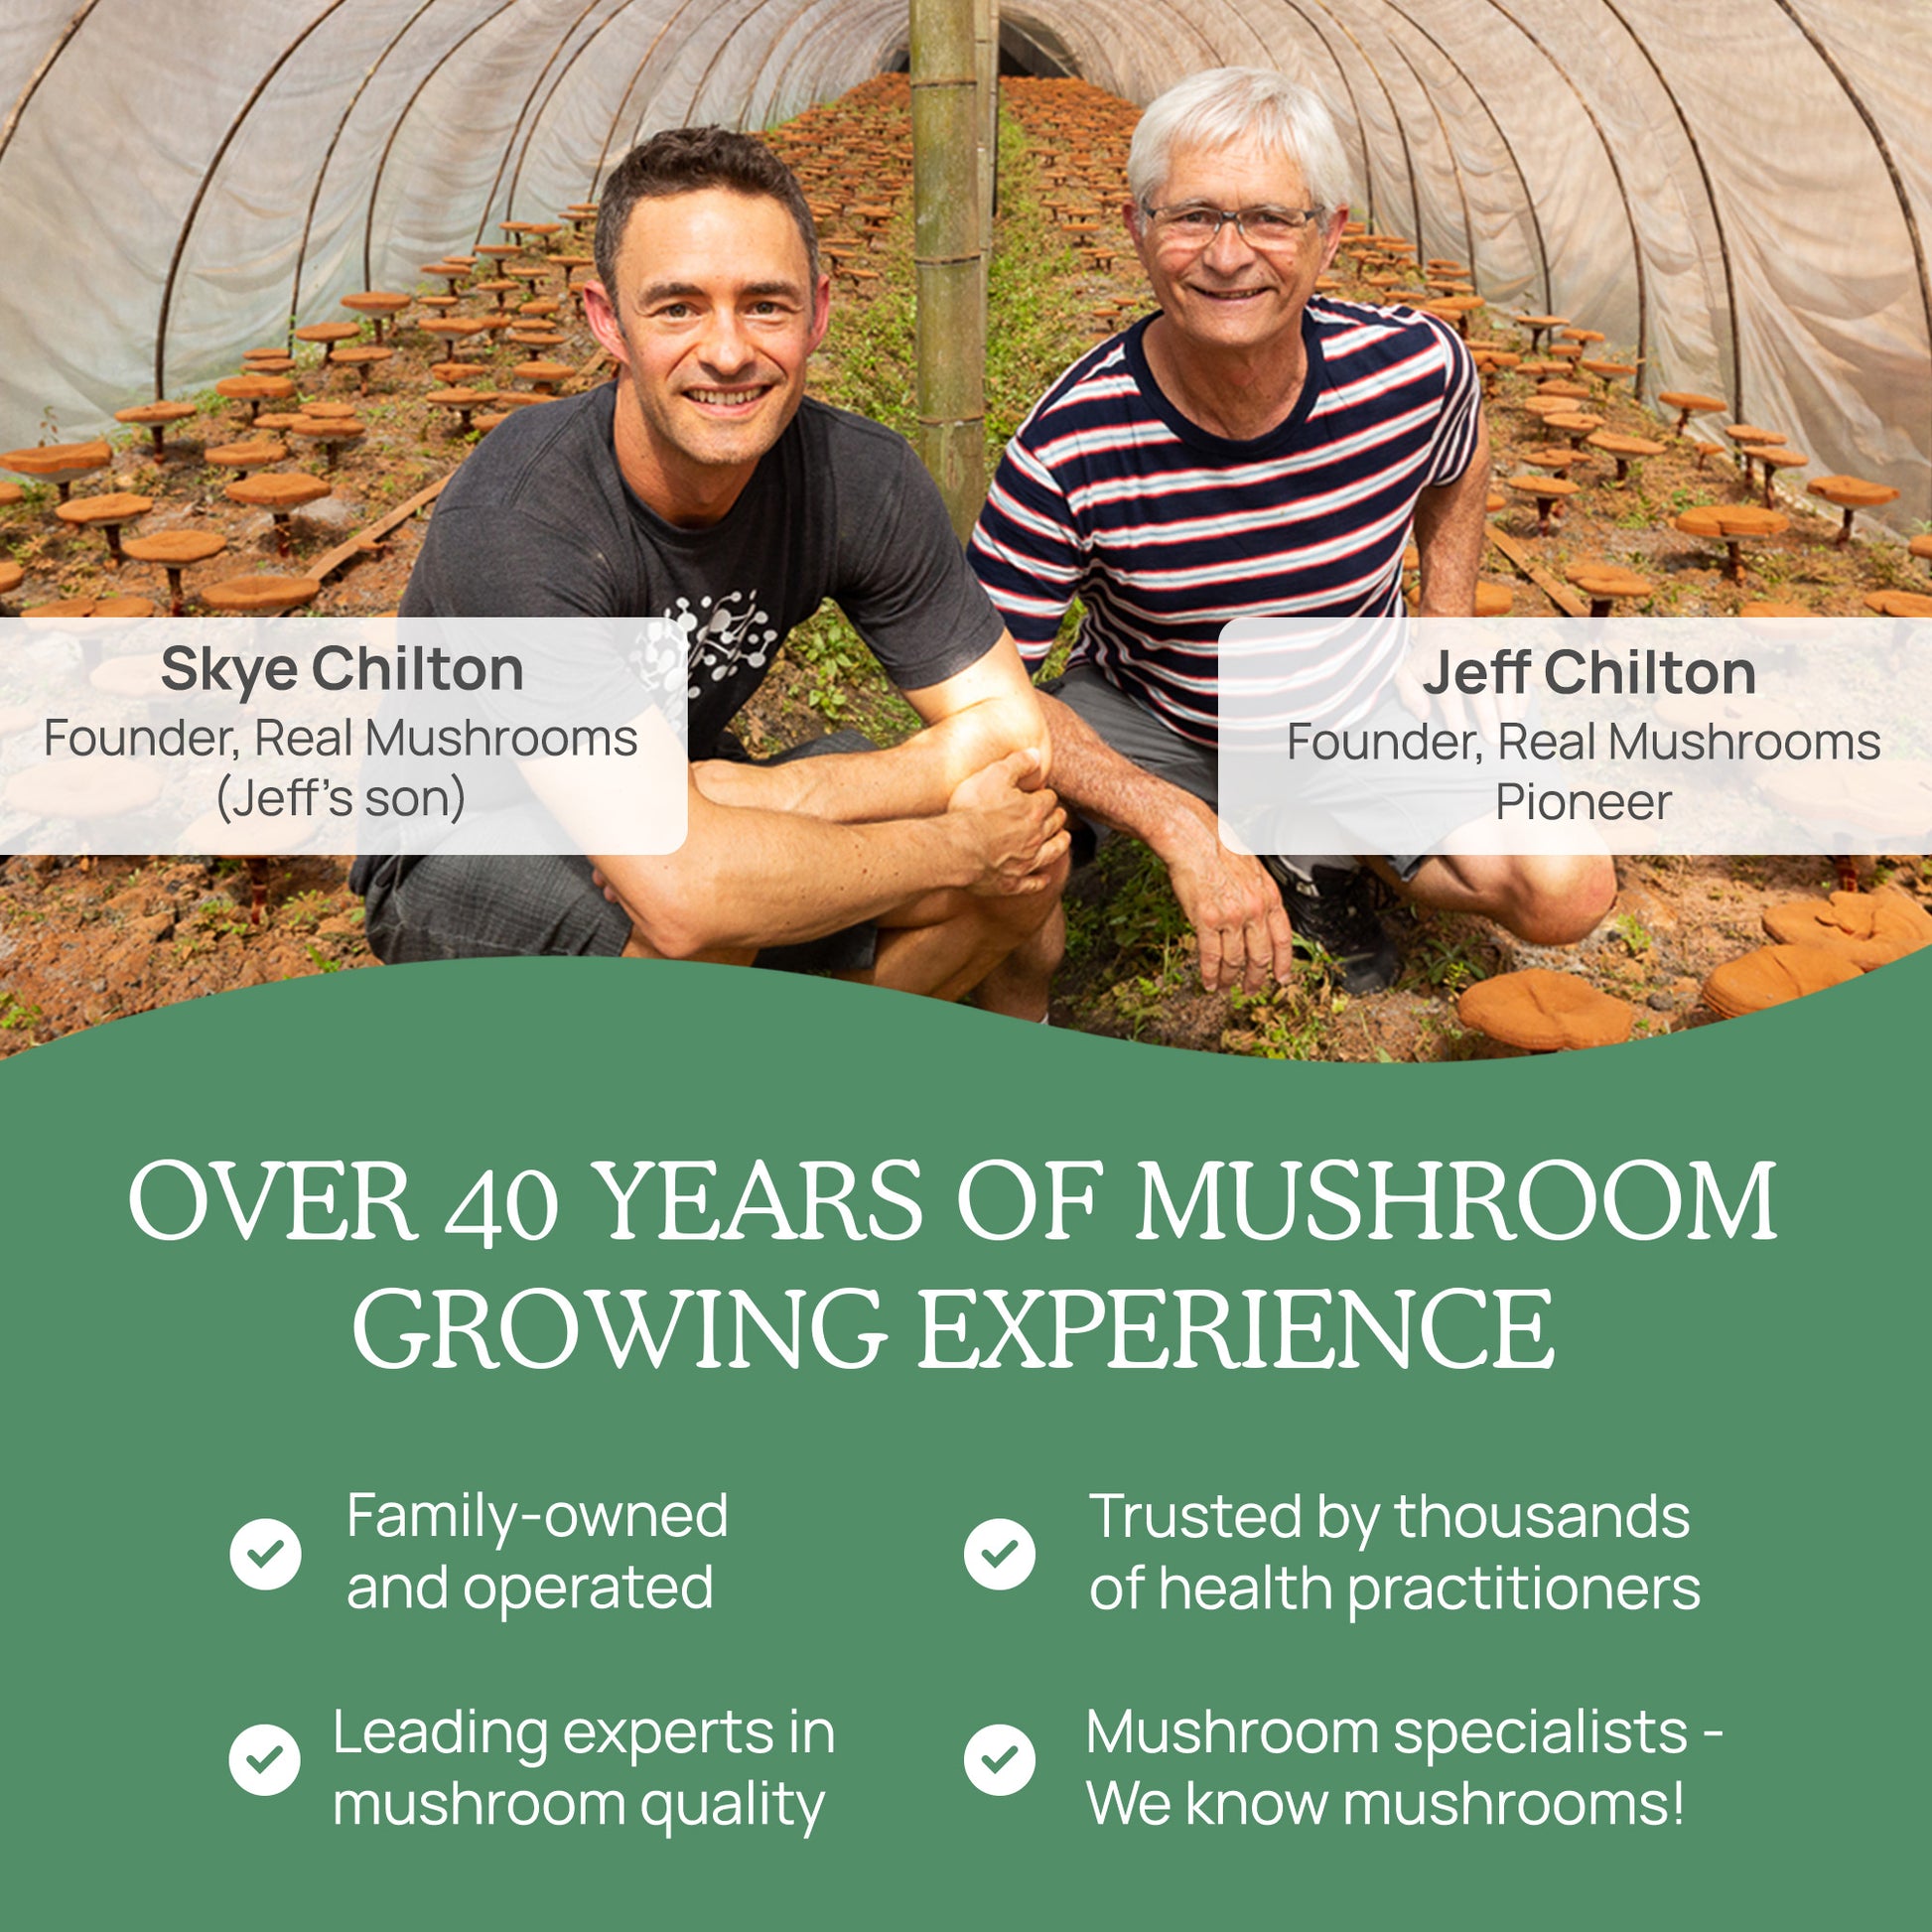 Sentence with product and brand name: "Two men smiling inside a Real Mushrooms growing facility, one older and identified as a pioneer in the field, the other younger and his son, with text highlighting over 40 years of experience in organic mushroom cultivation using 5 Defenders Organic Mushroom Blend Capsules.